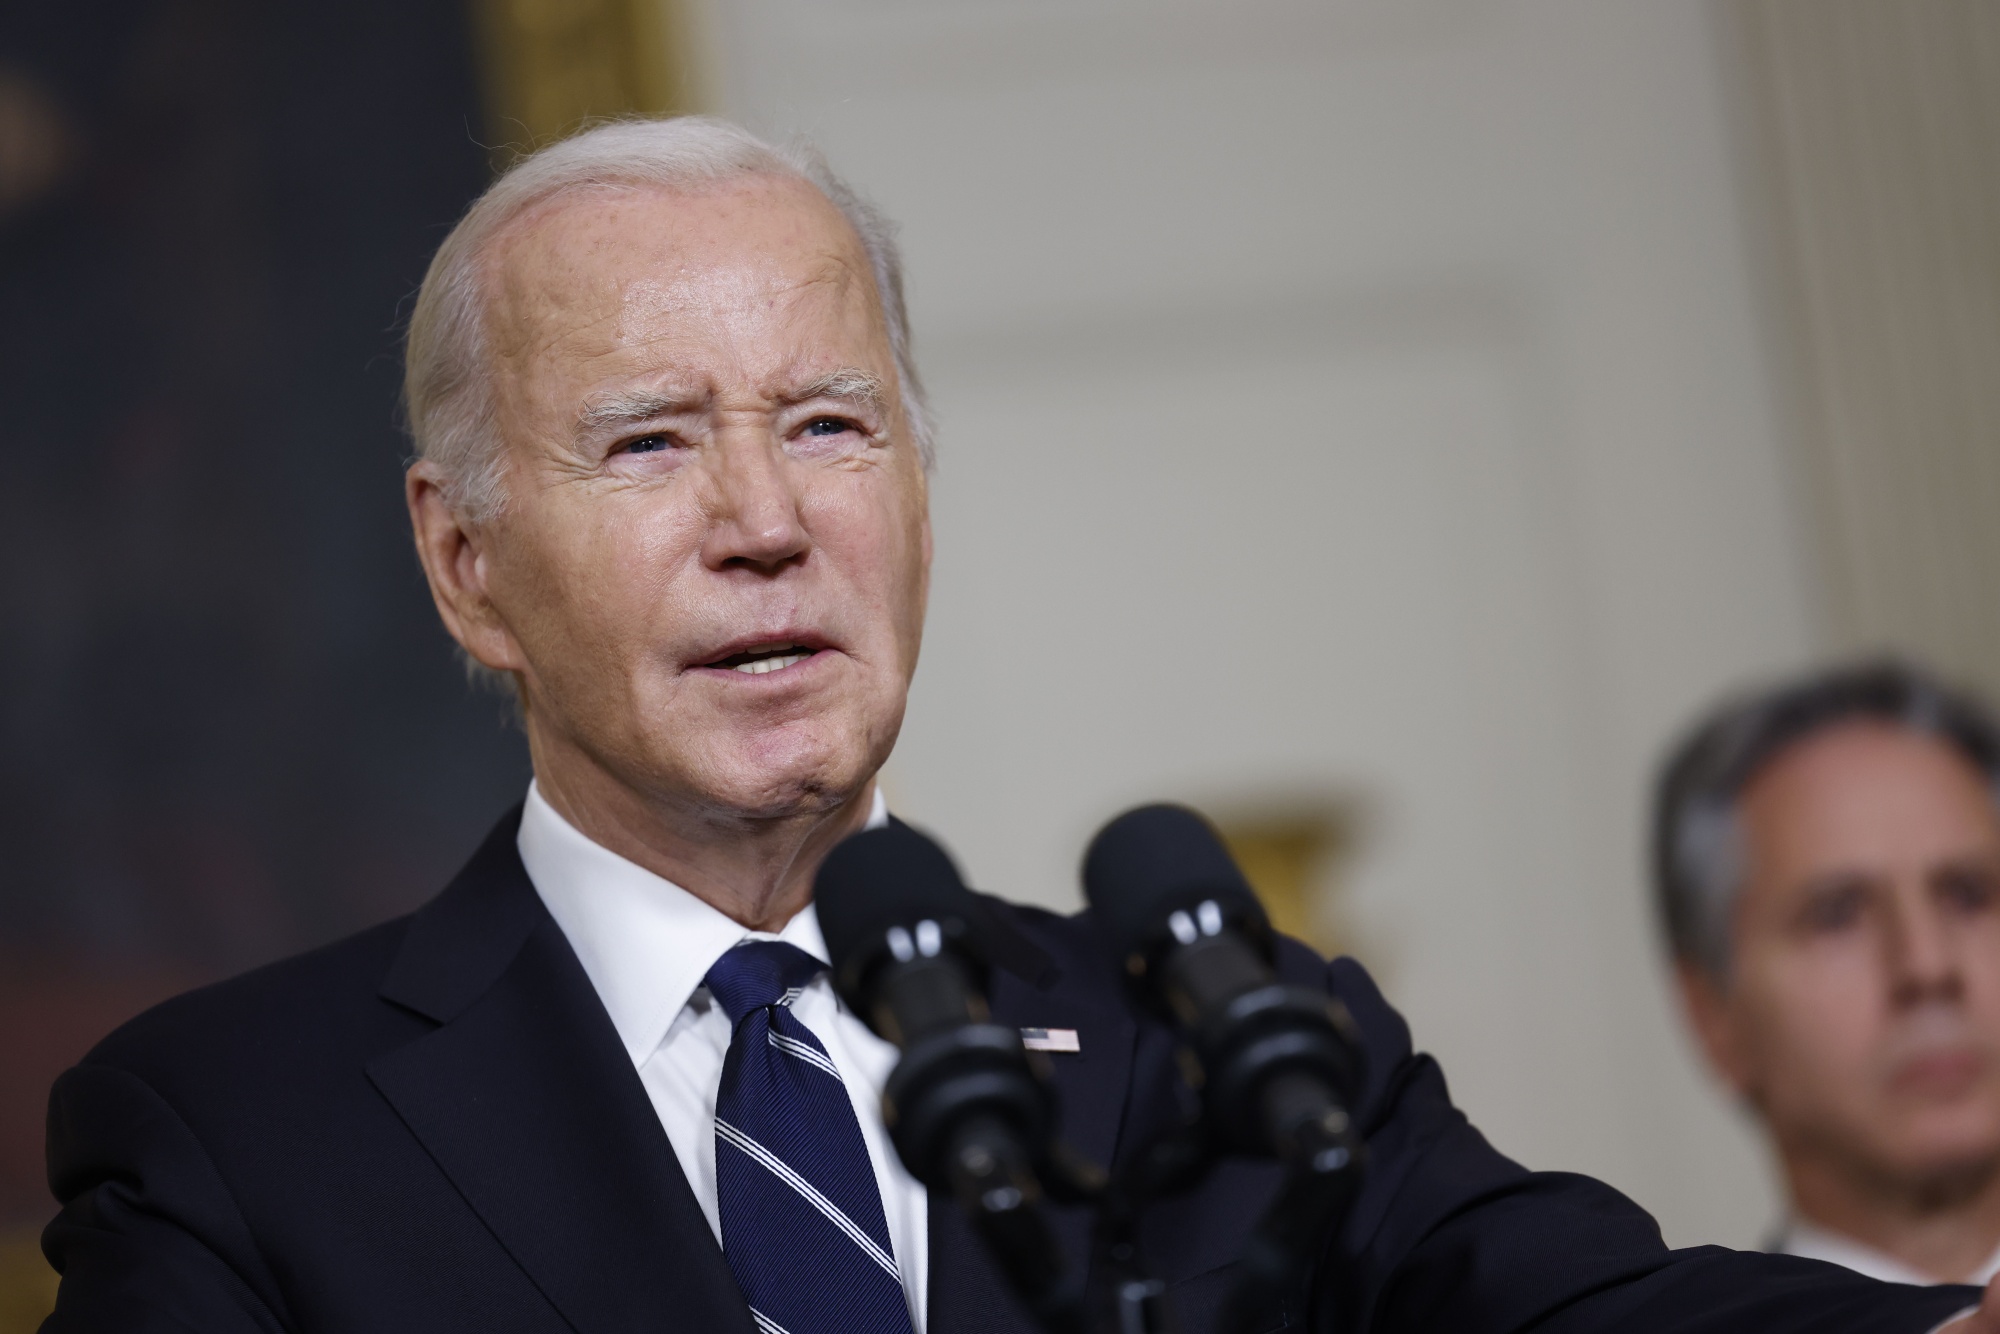 What Are Junk Fees? Biden Expands Crackdown With New Rule - Bloomberg